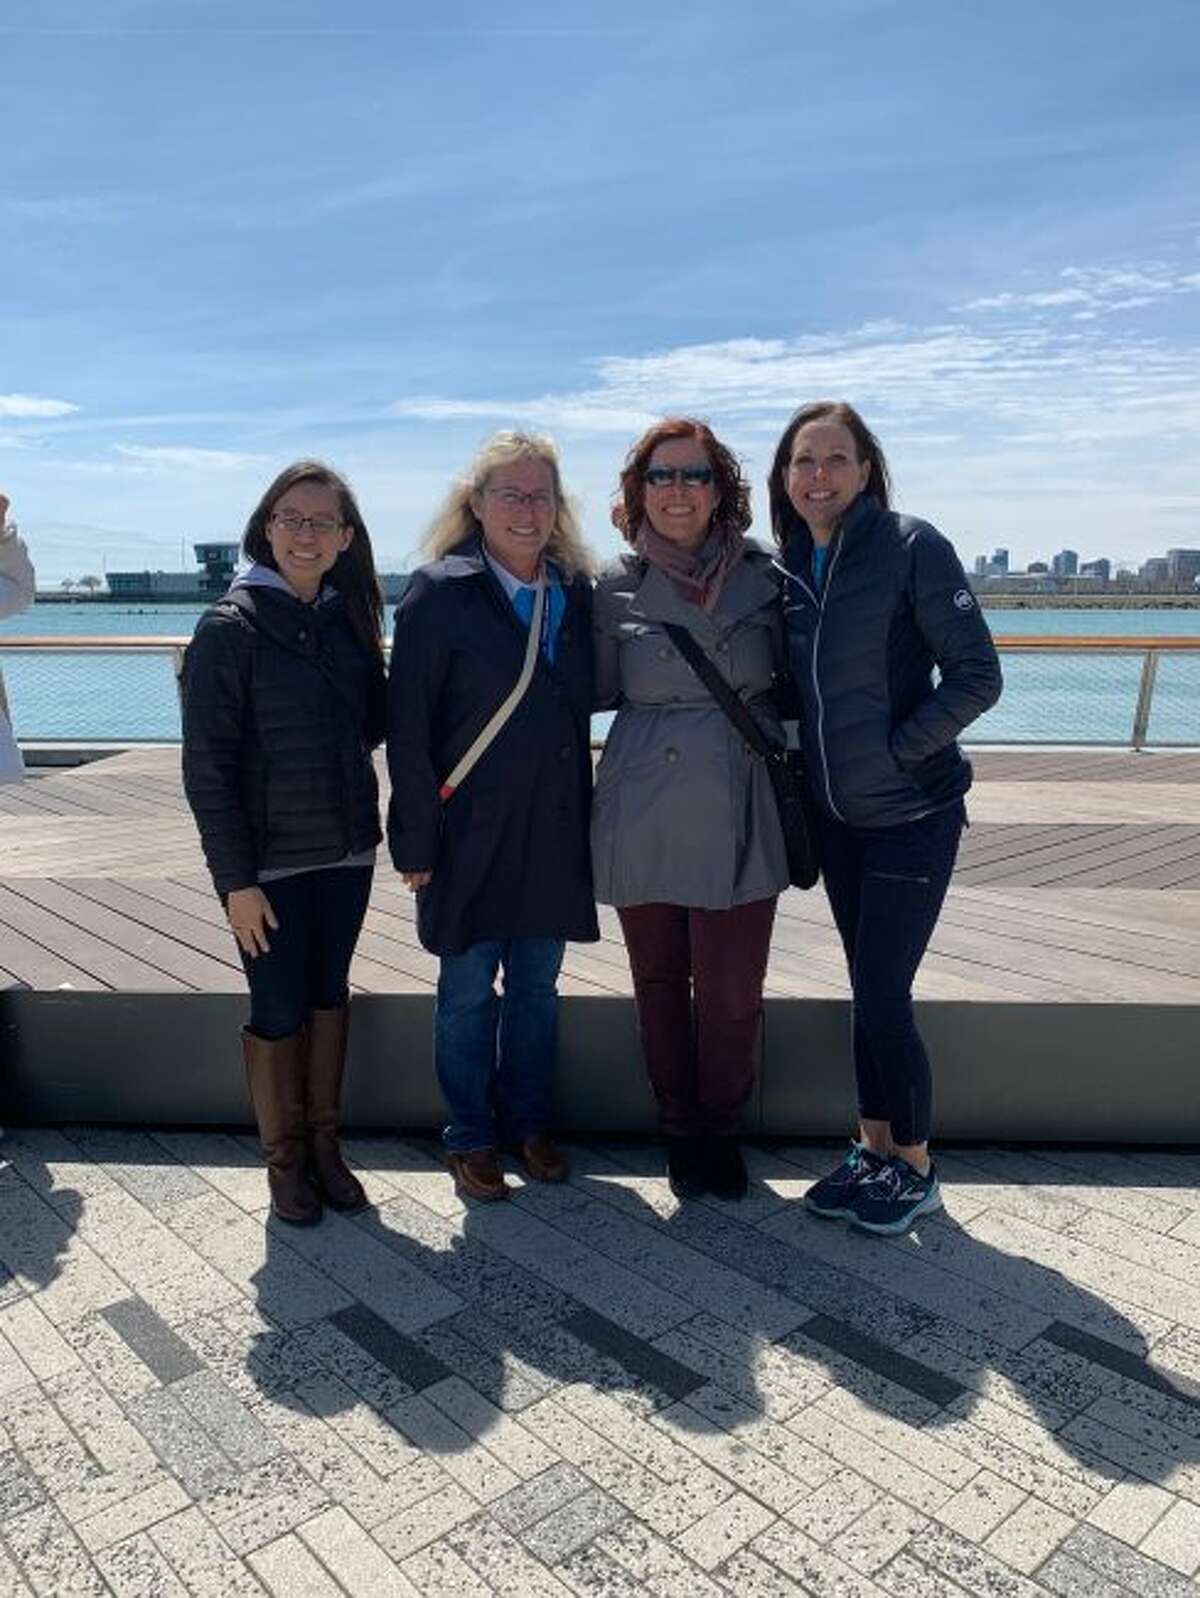 Onekama teachers Michele Warman and Megan McCarthy worked with Chicago teachers Christina Copre and Carolyn Begley to coordinate the student partnership.